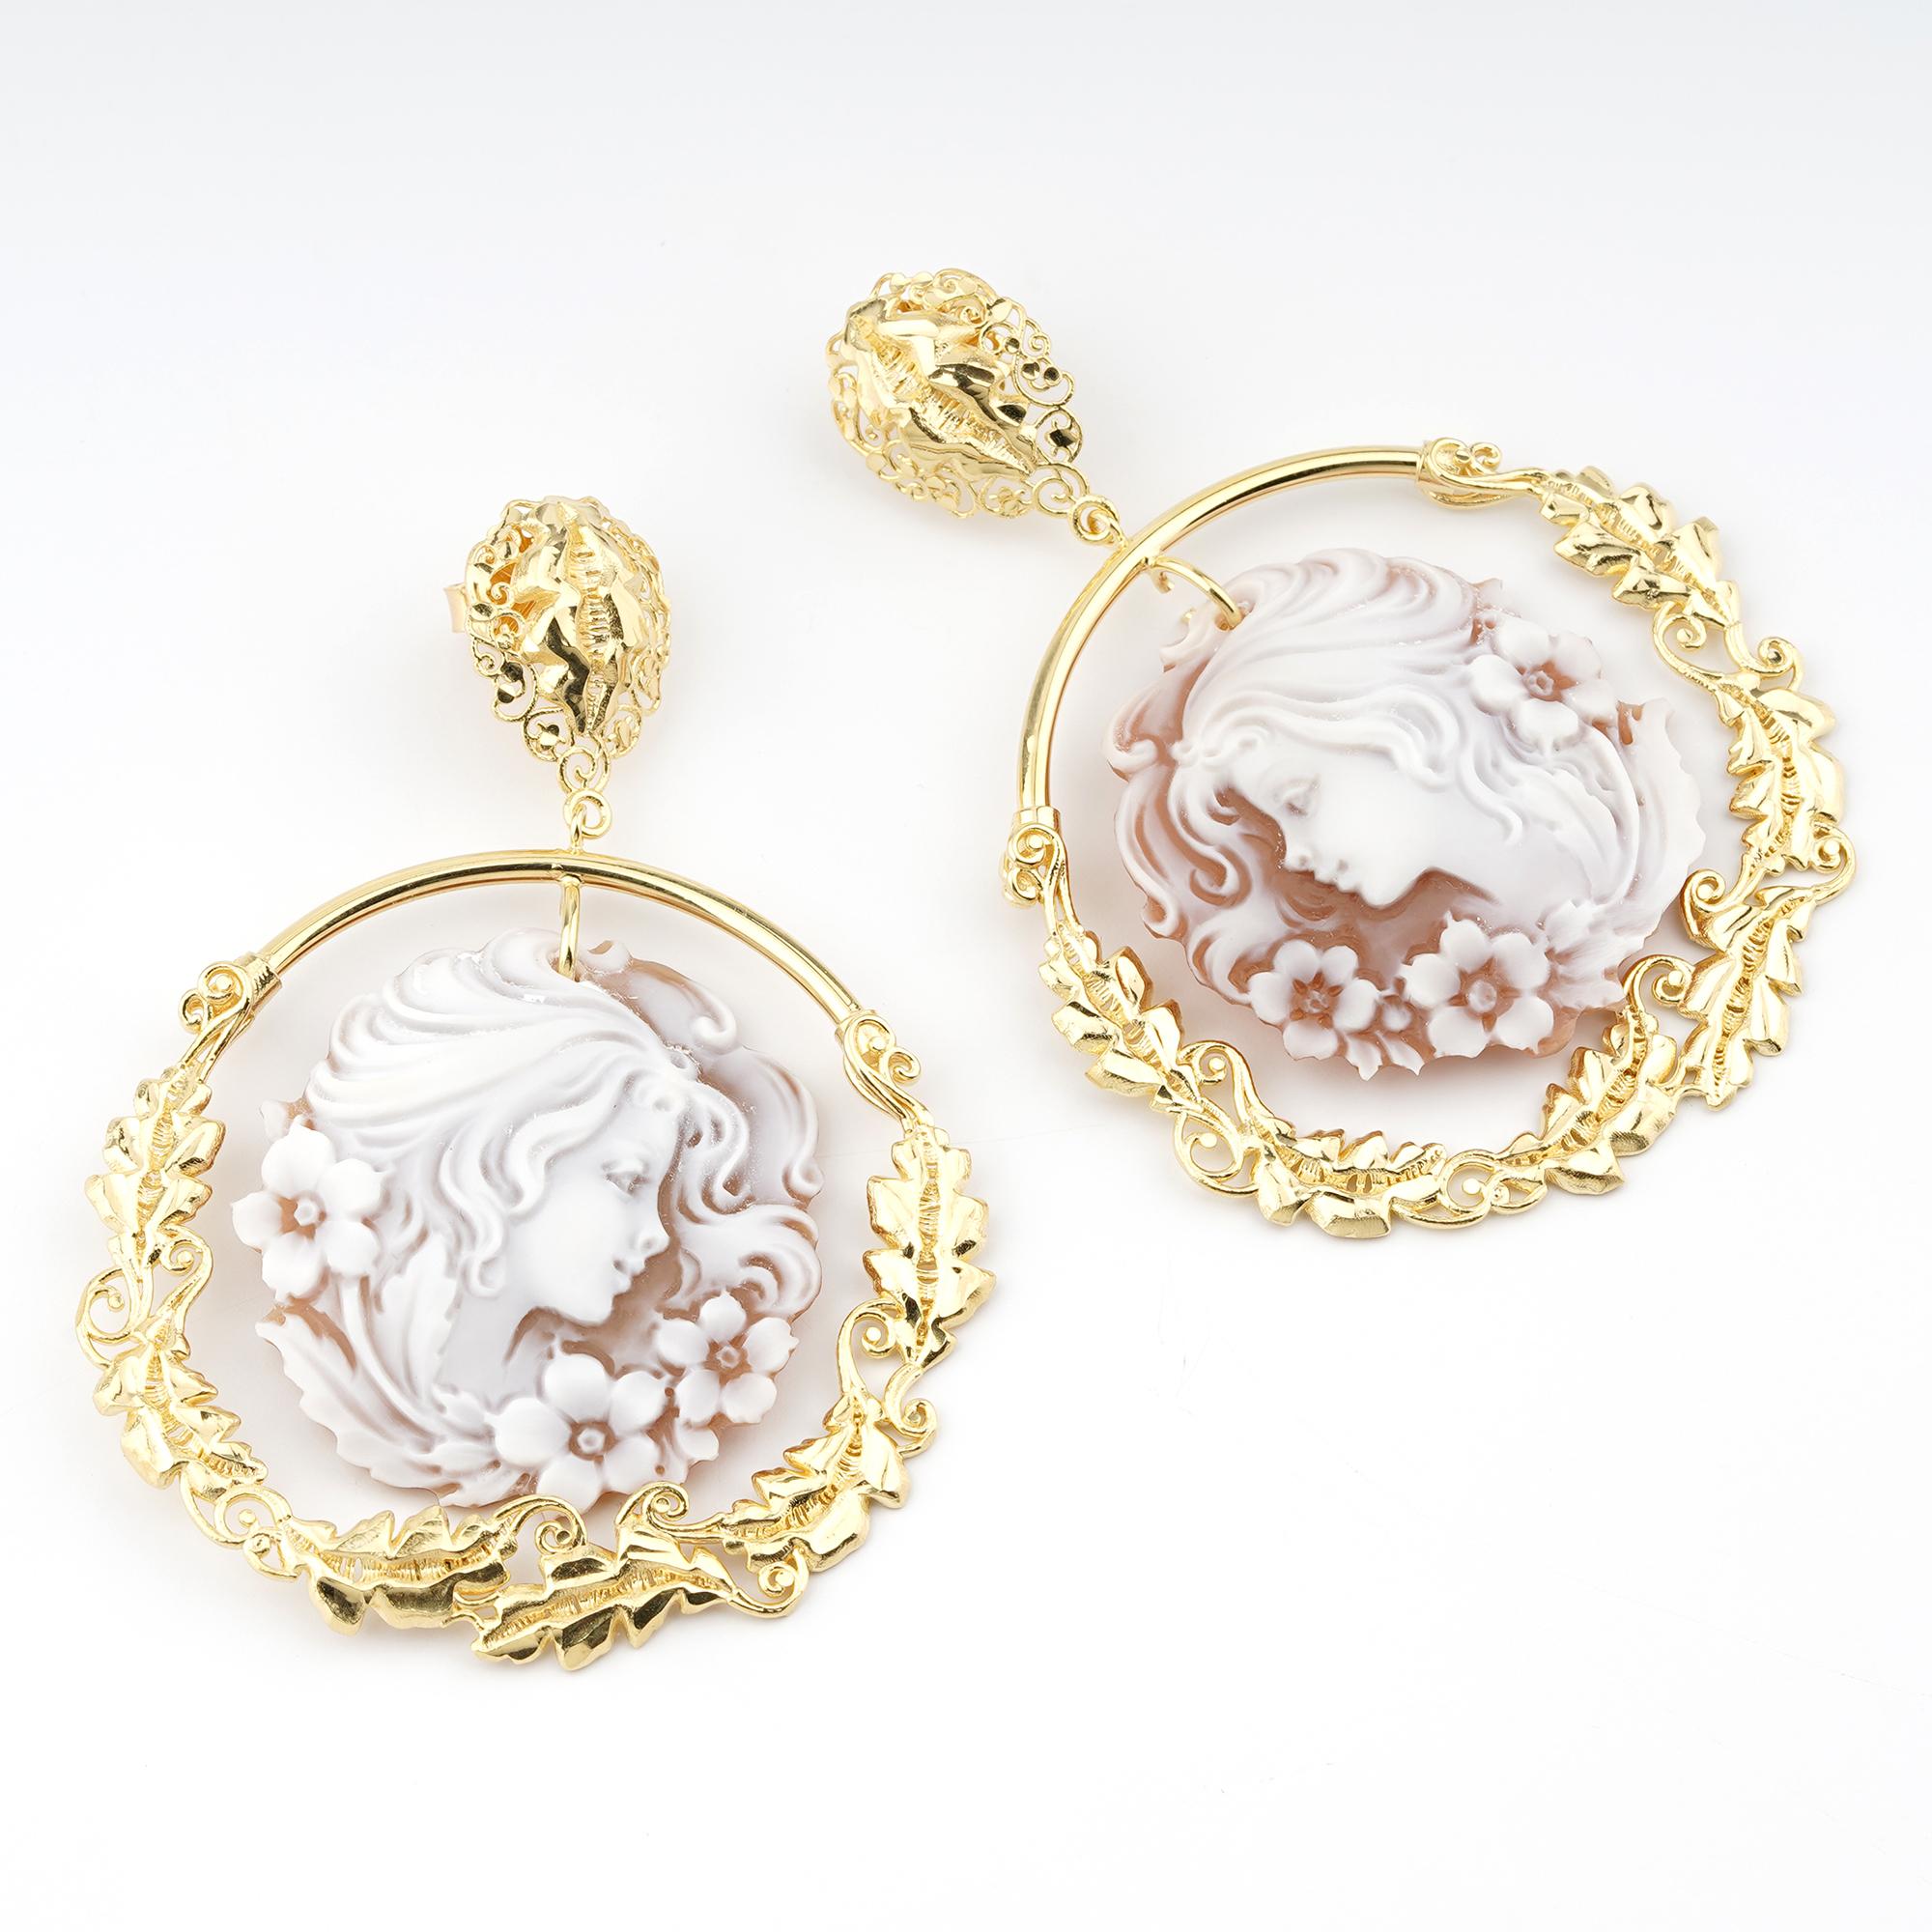 18 carat Gold Plated 925 Sterling Silver Sea Shell 35mm Cameo Earrings. Fully handcarved Portrait on a sea shell cameo set in a 18kt Gold plated silver earrings. Carvings are performed by our master artisans with generations of experience, all